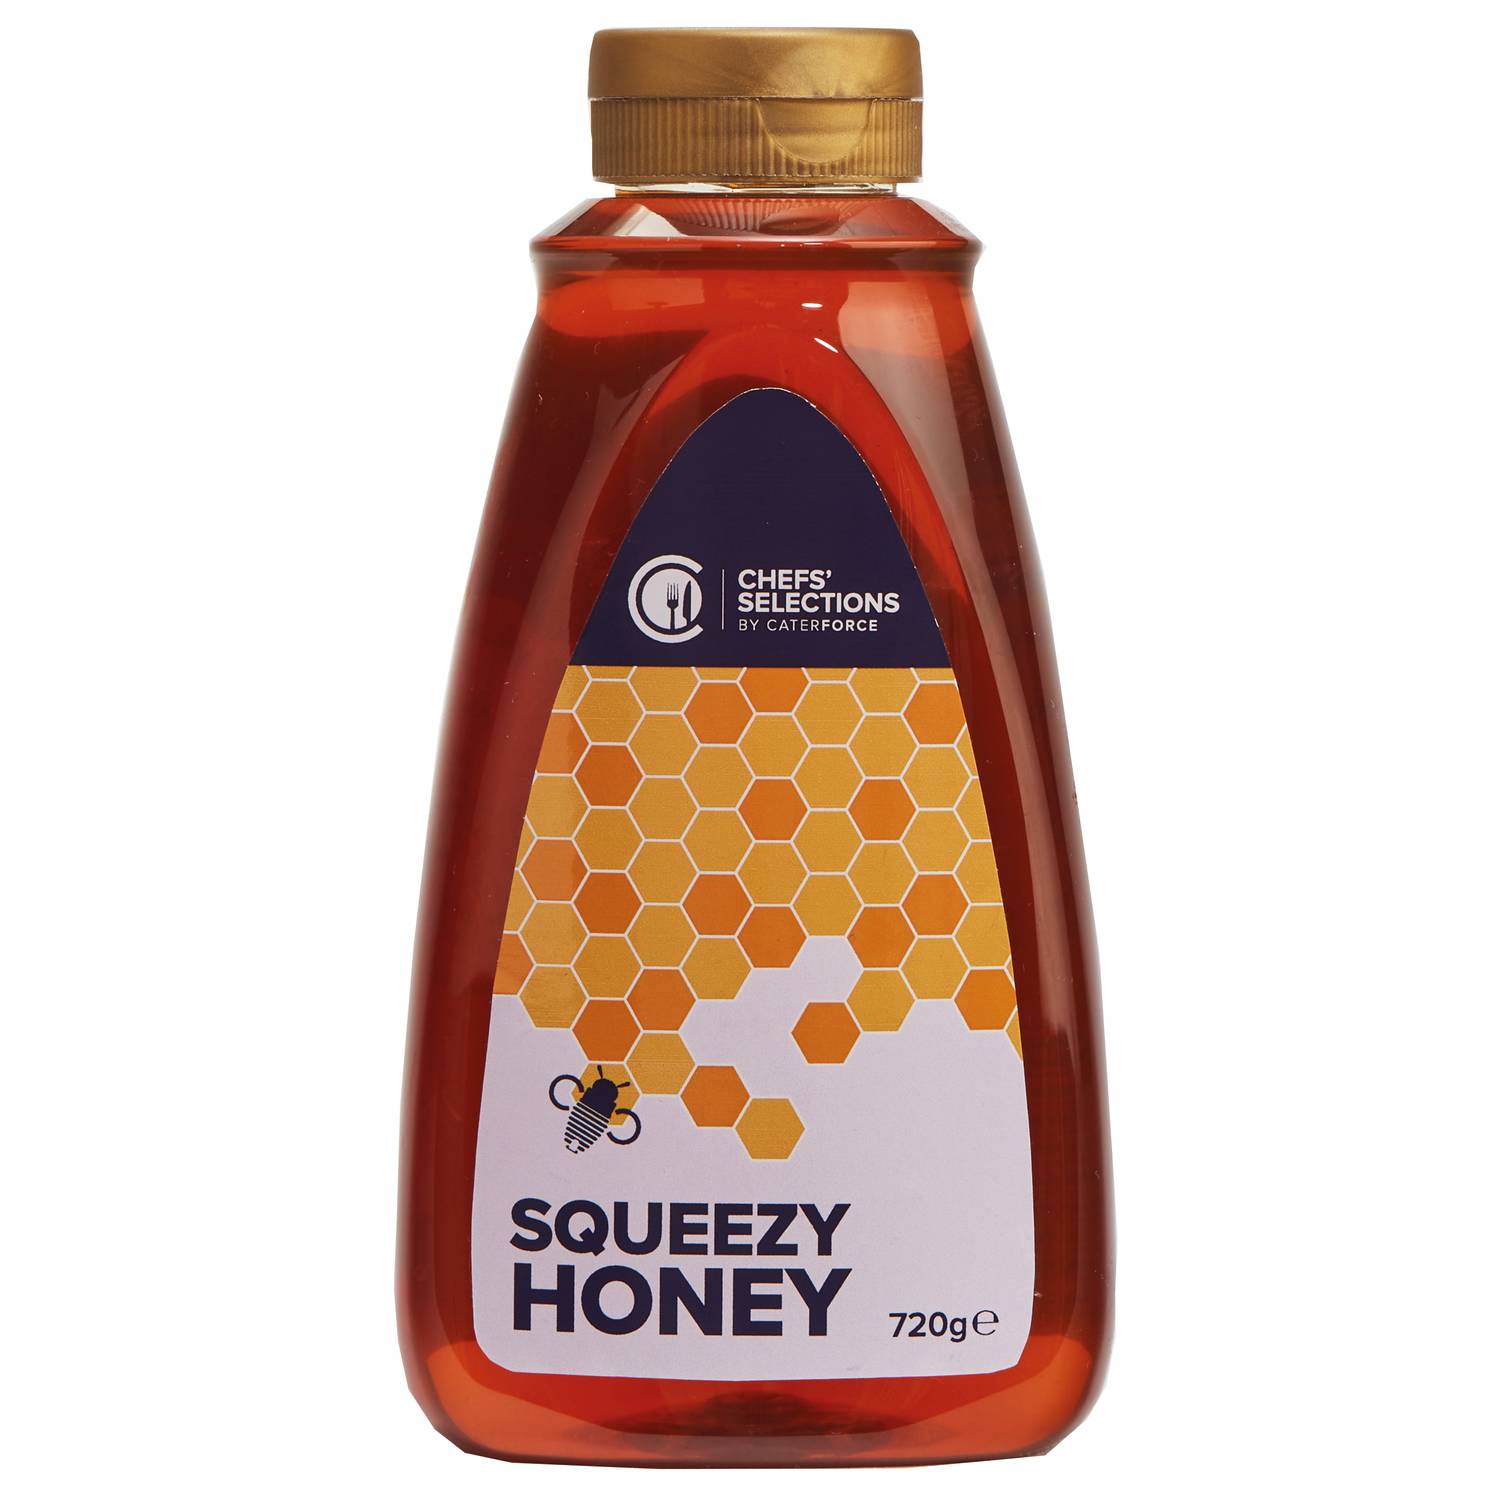 Chefs’ Selections Squeezy Honey (5 x 720g)